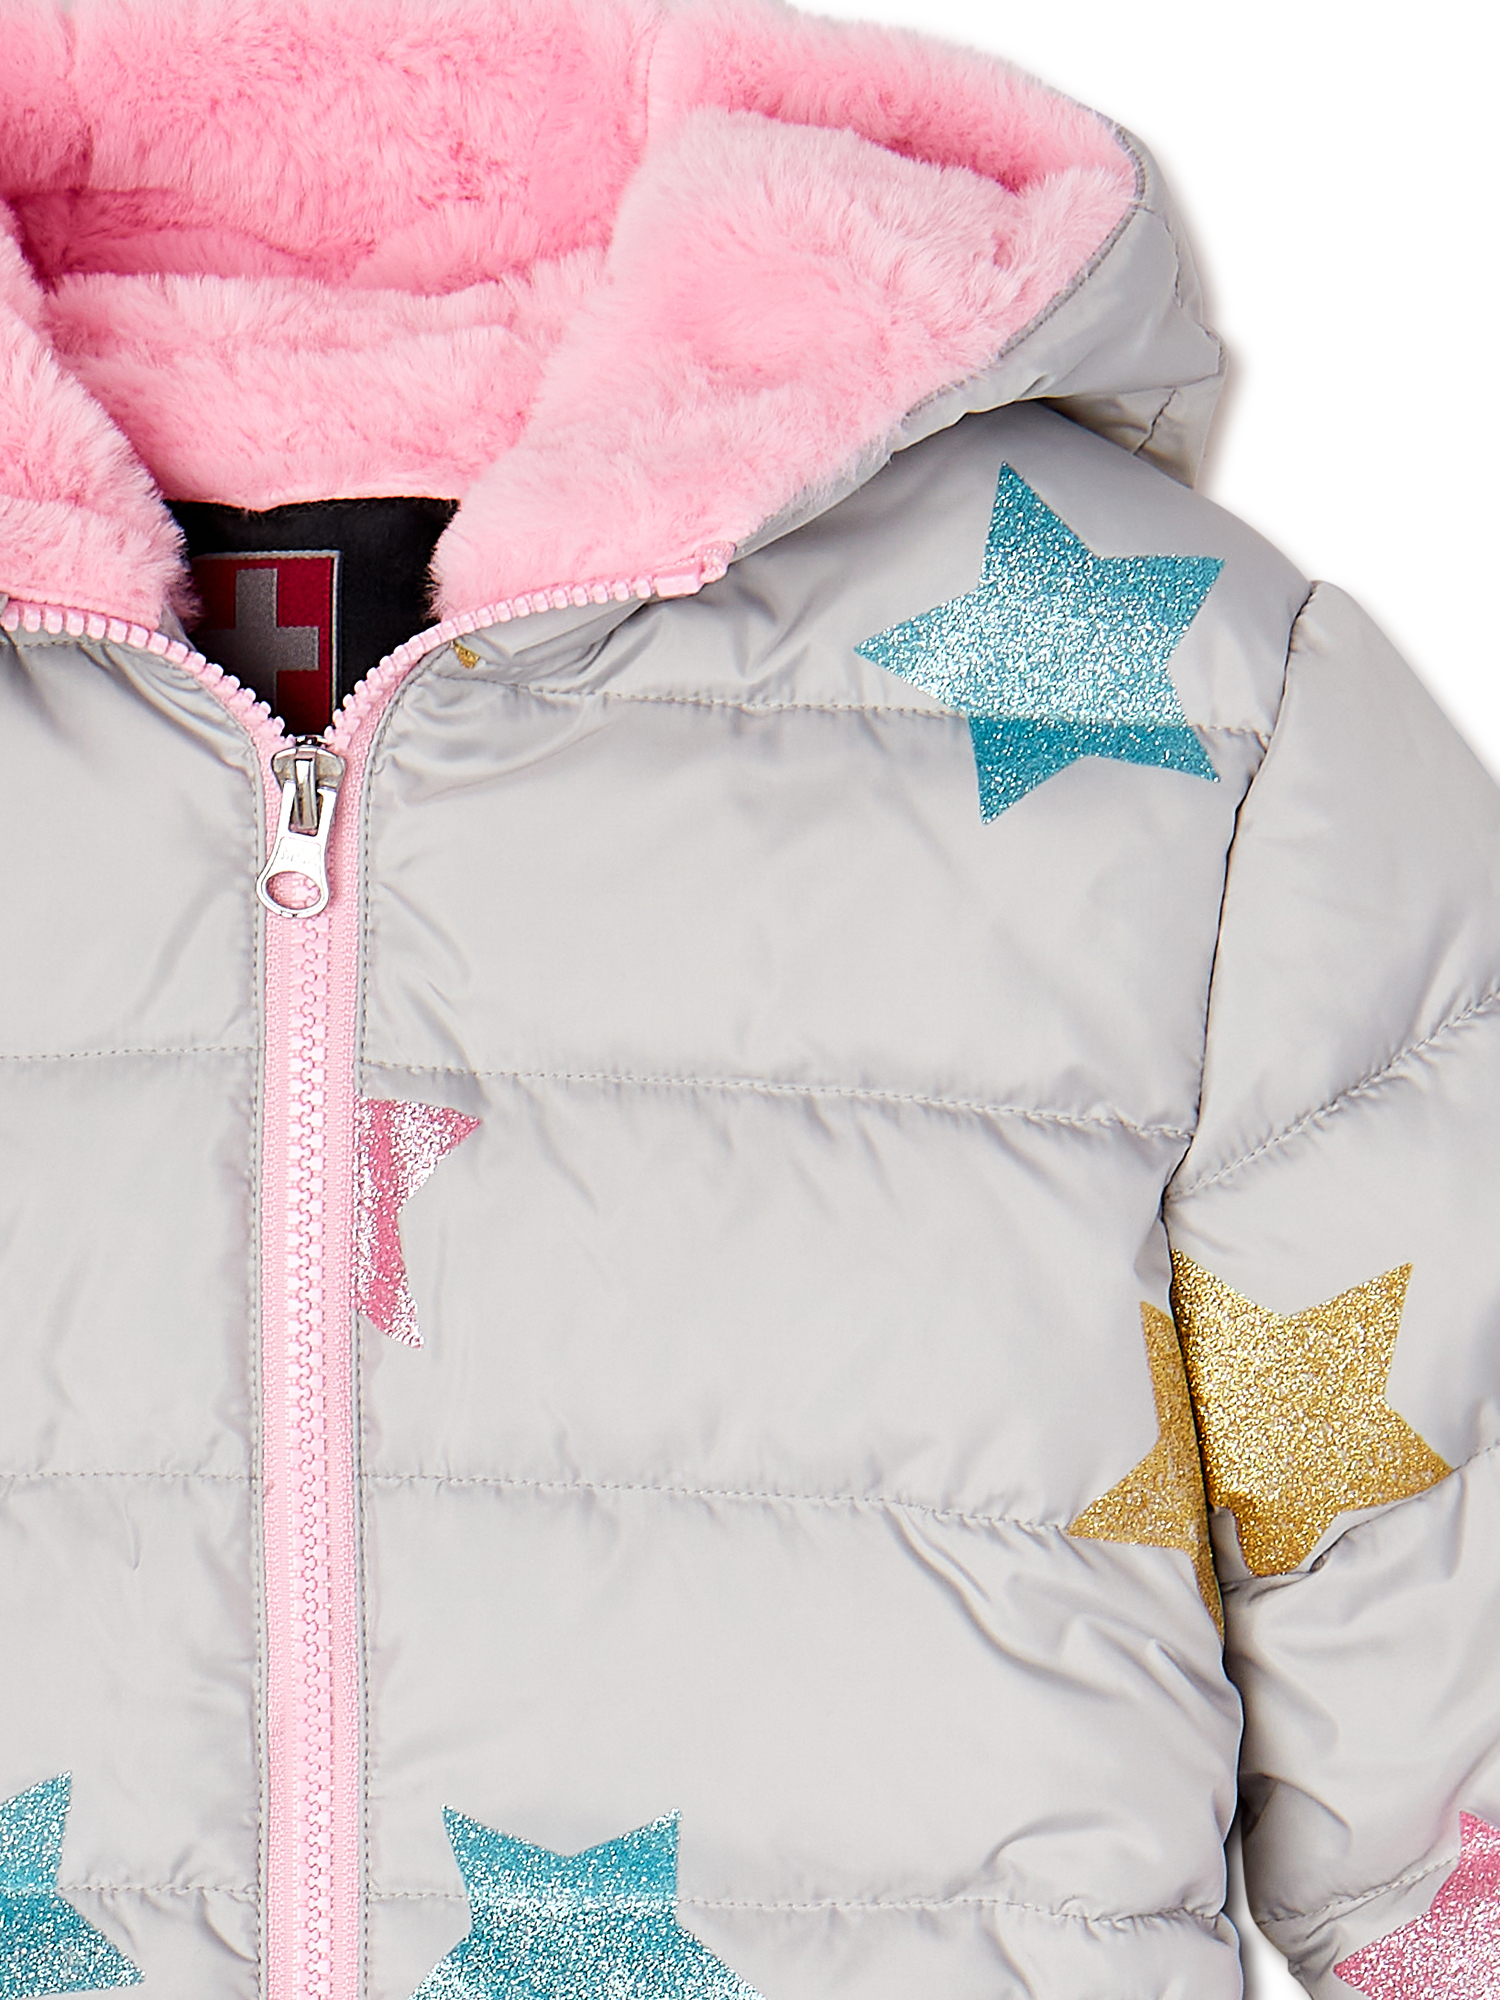 Swiss Tech Baby and Toddler Girl Puffer Jacket, Sizes 12M-5T - image 2 of 3